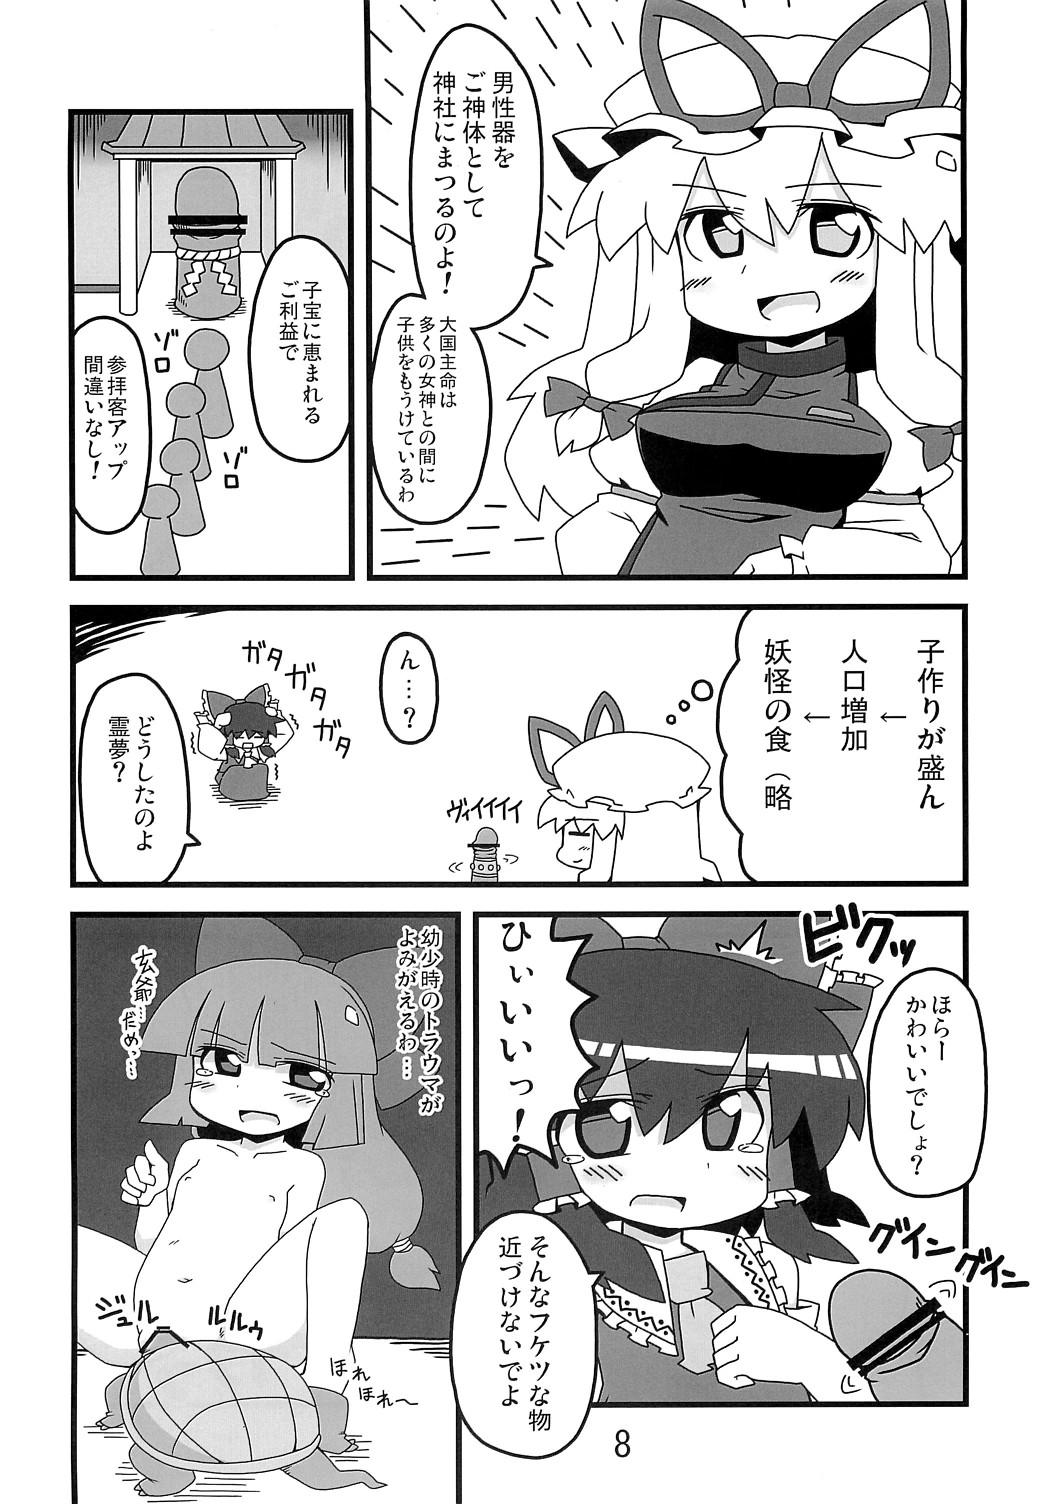 Bhabi 東方豊年祭 - Touhou project Cumfacial - Page 7